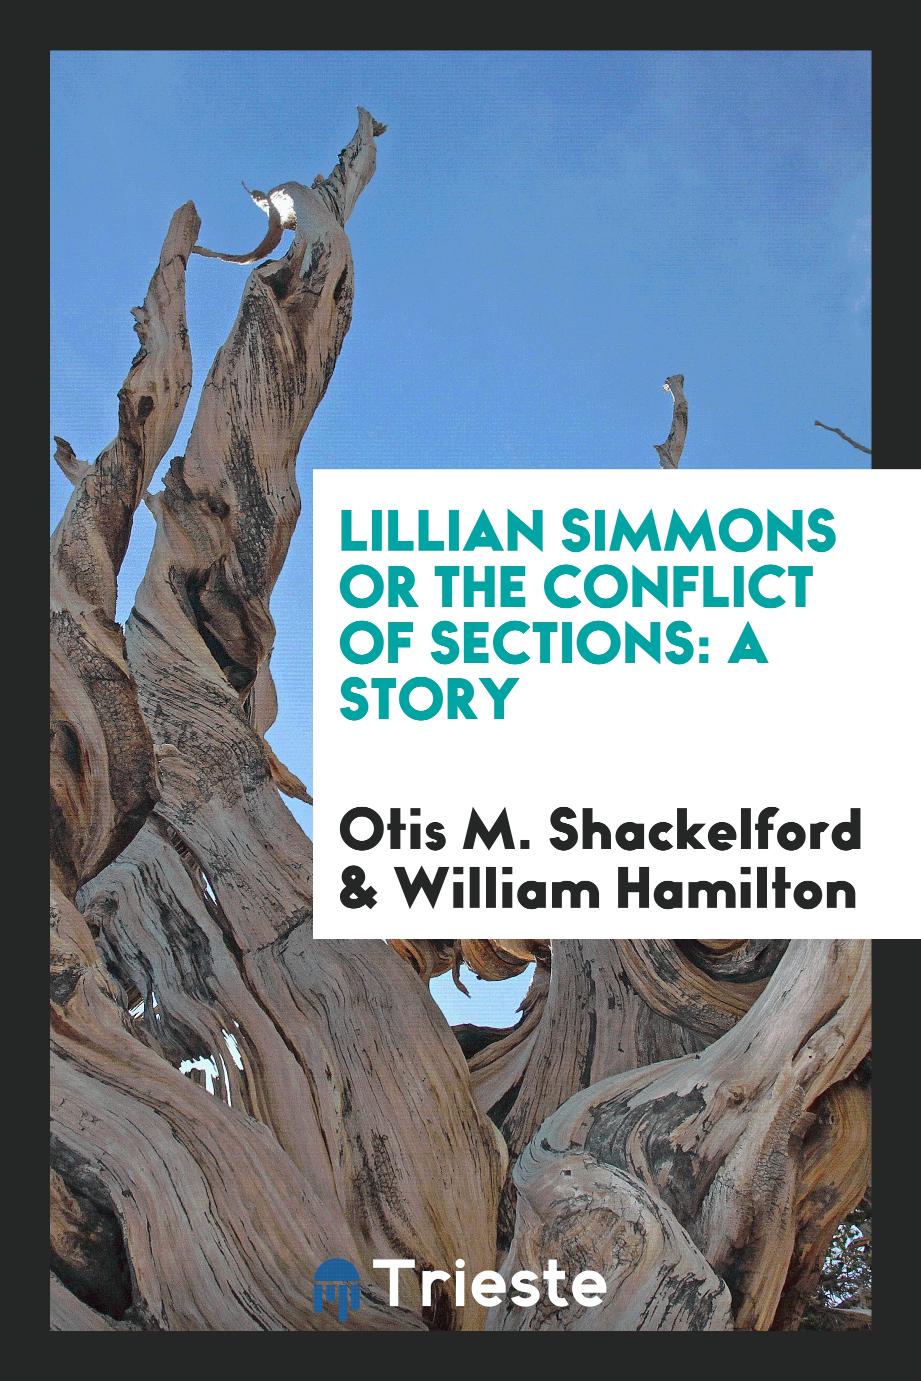 Lillian Simmons or The conflict of sections: a story